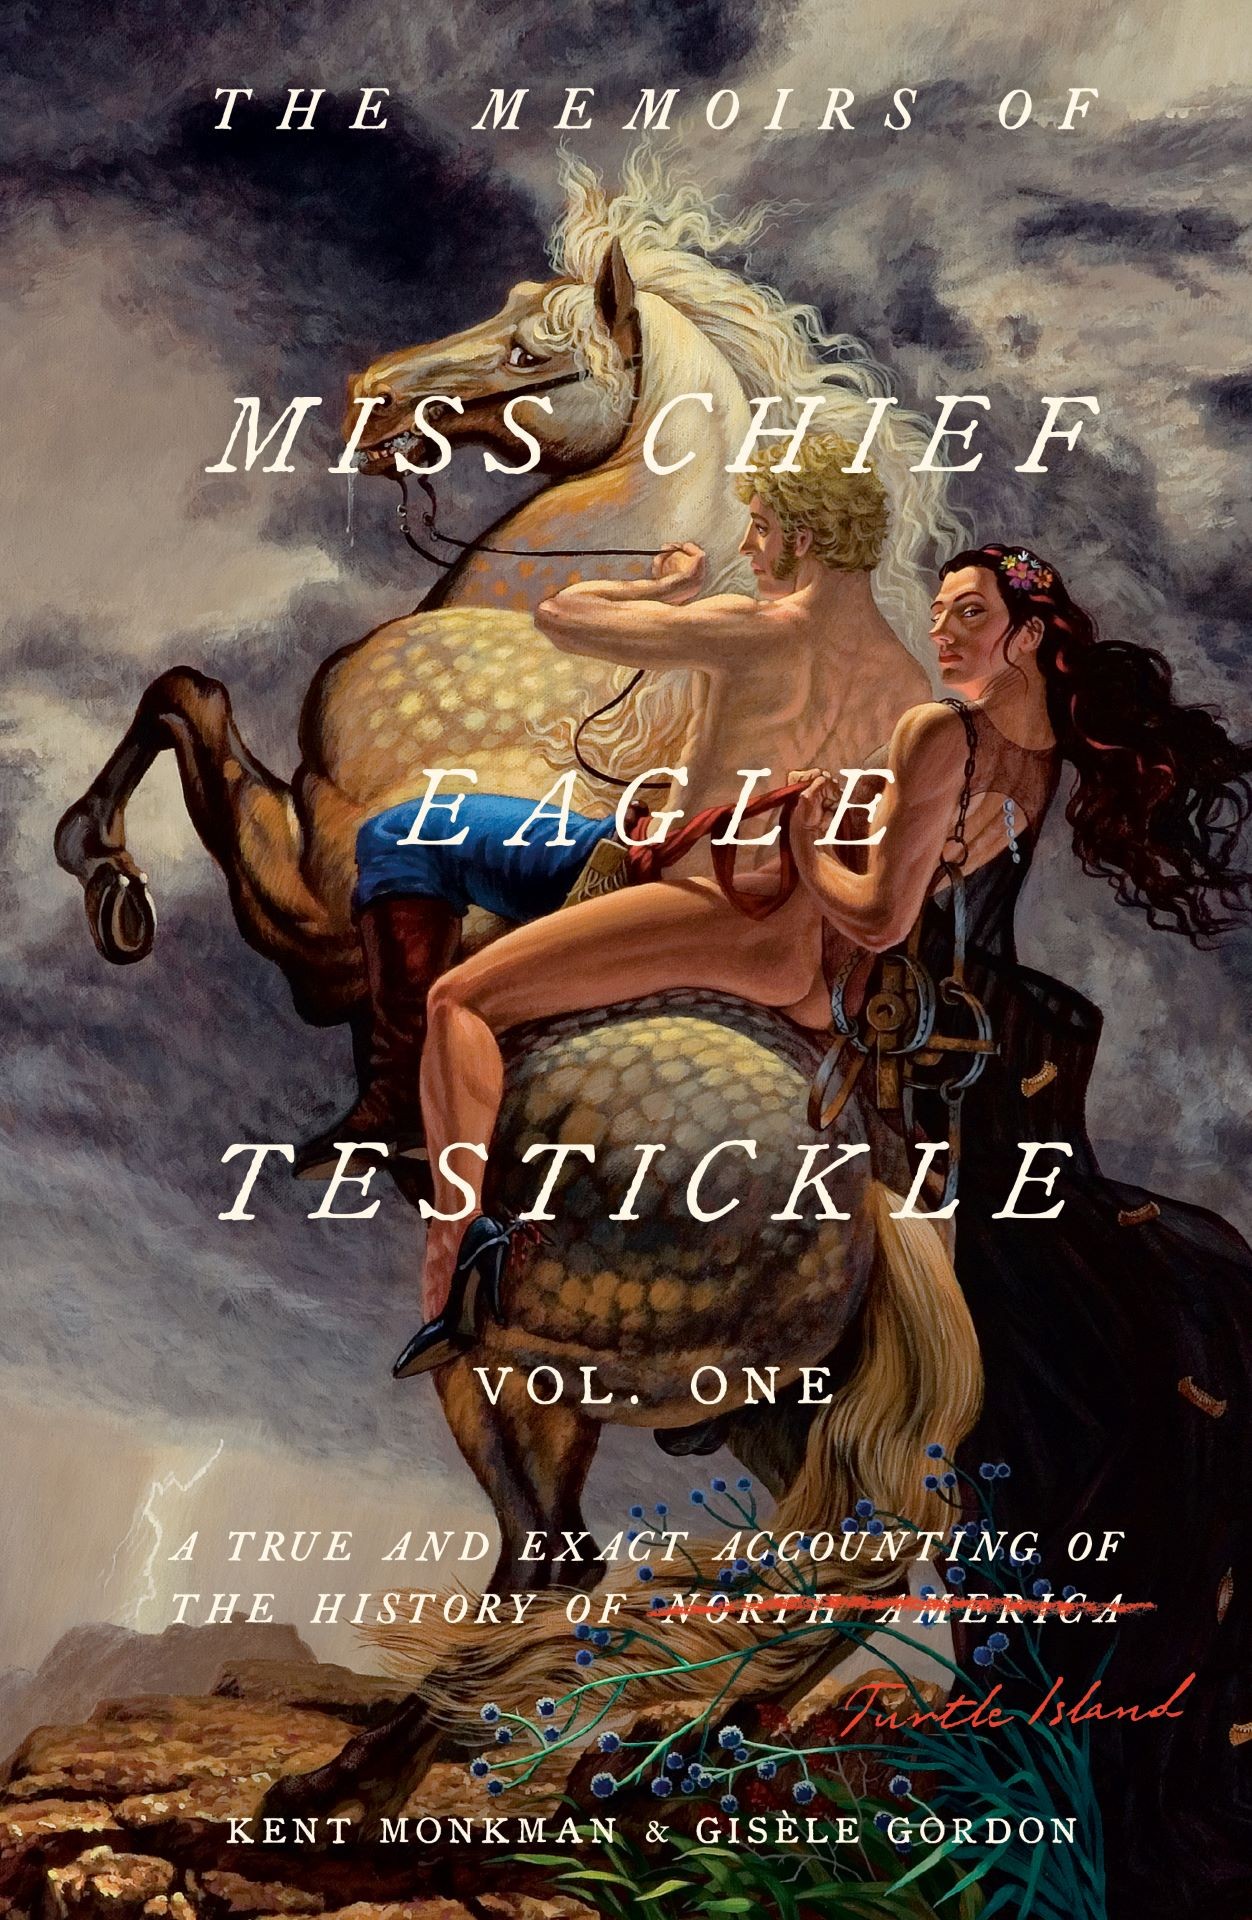 The book cover for Volume One shows two nude people riding a horse on its hide legs. The backdrop is stormy.